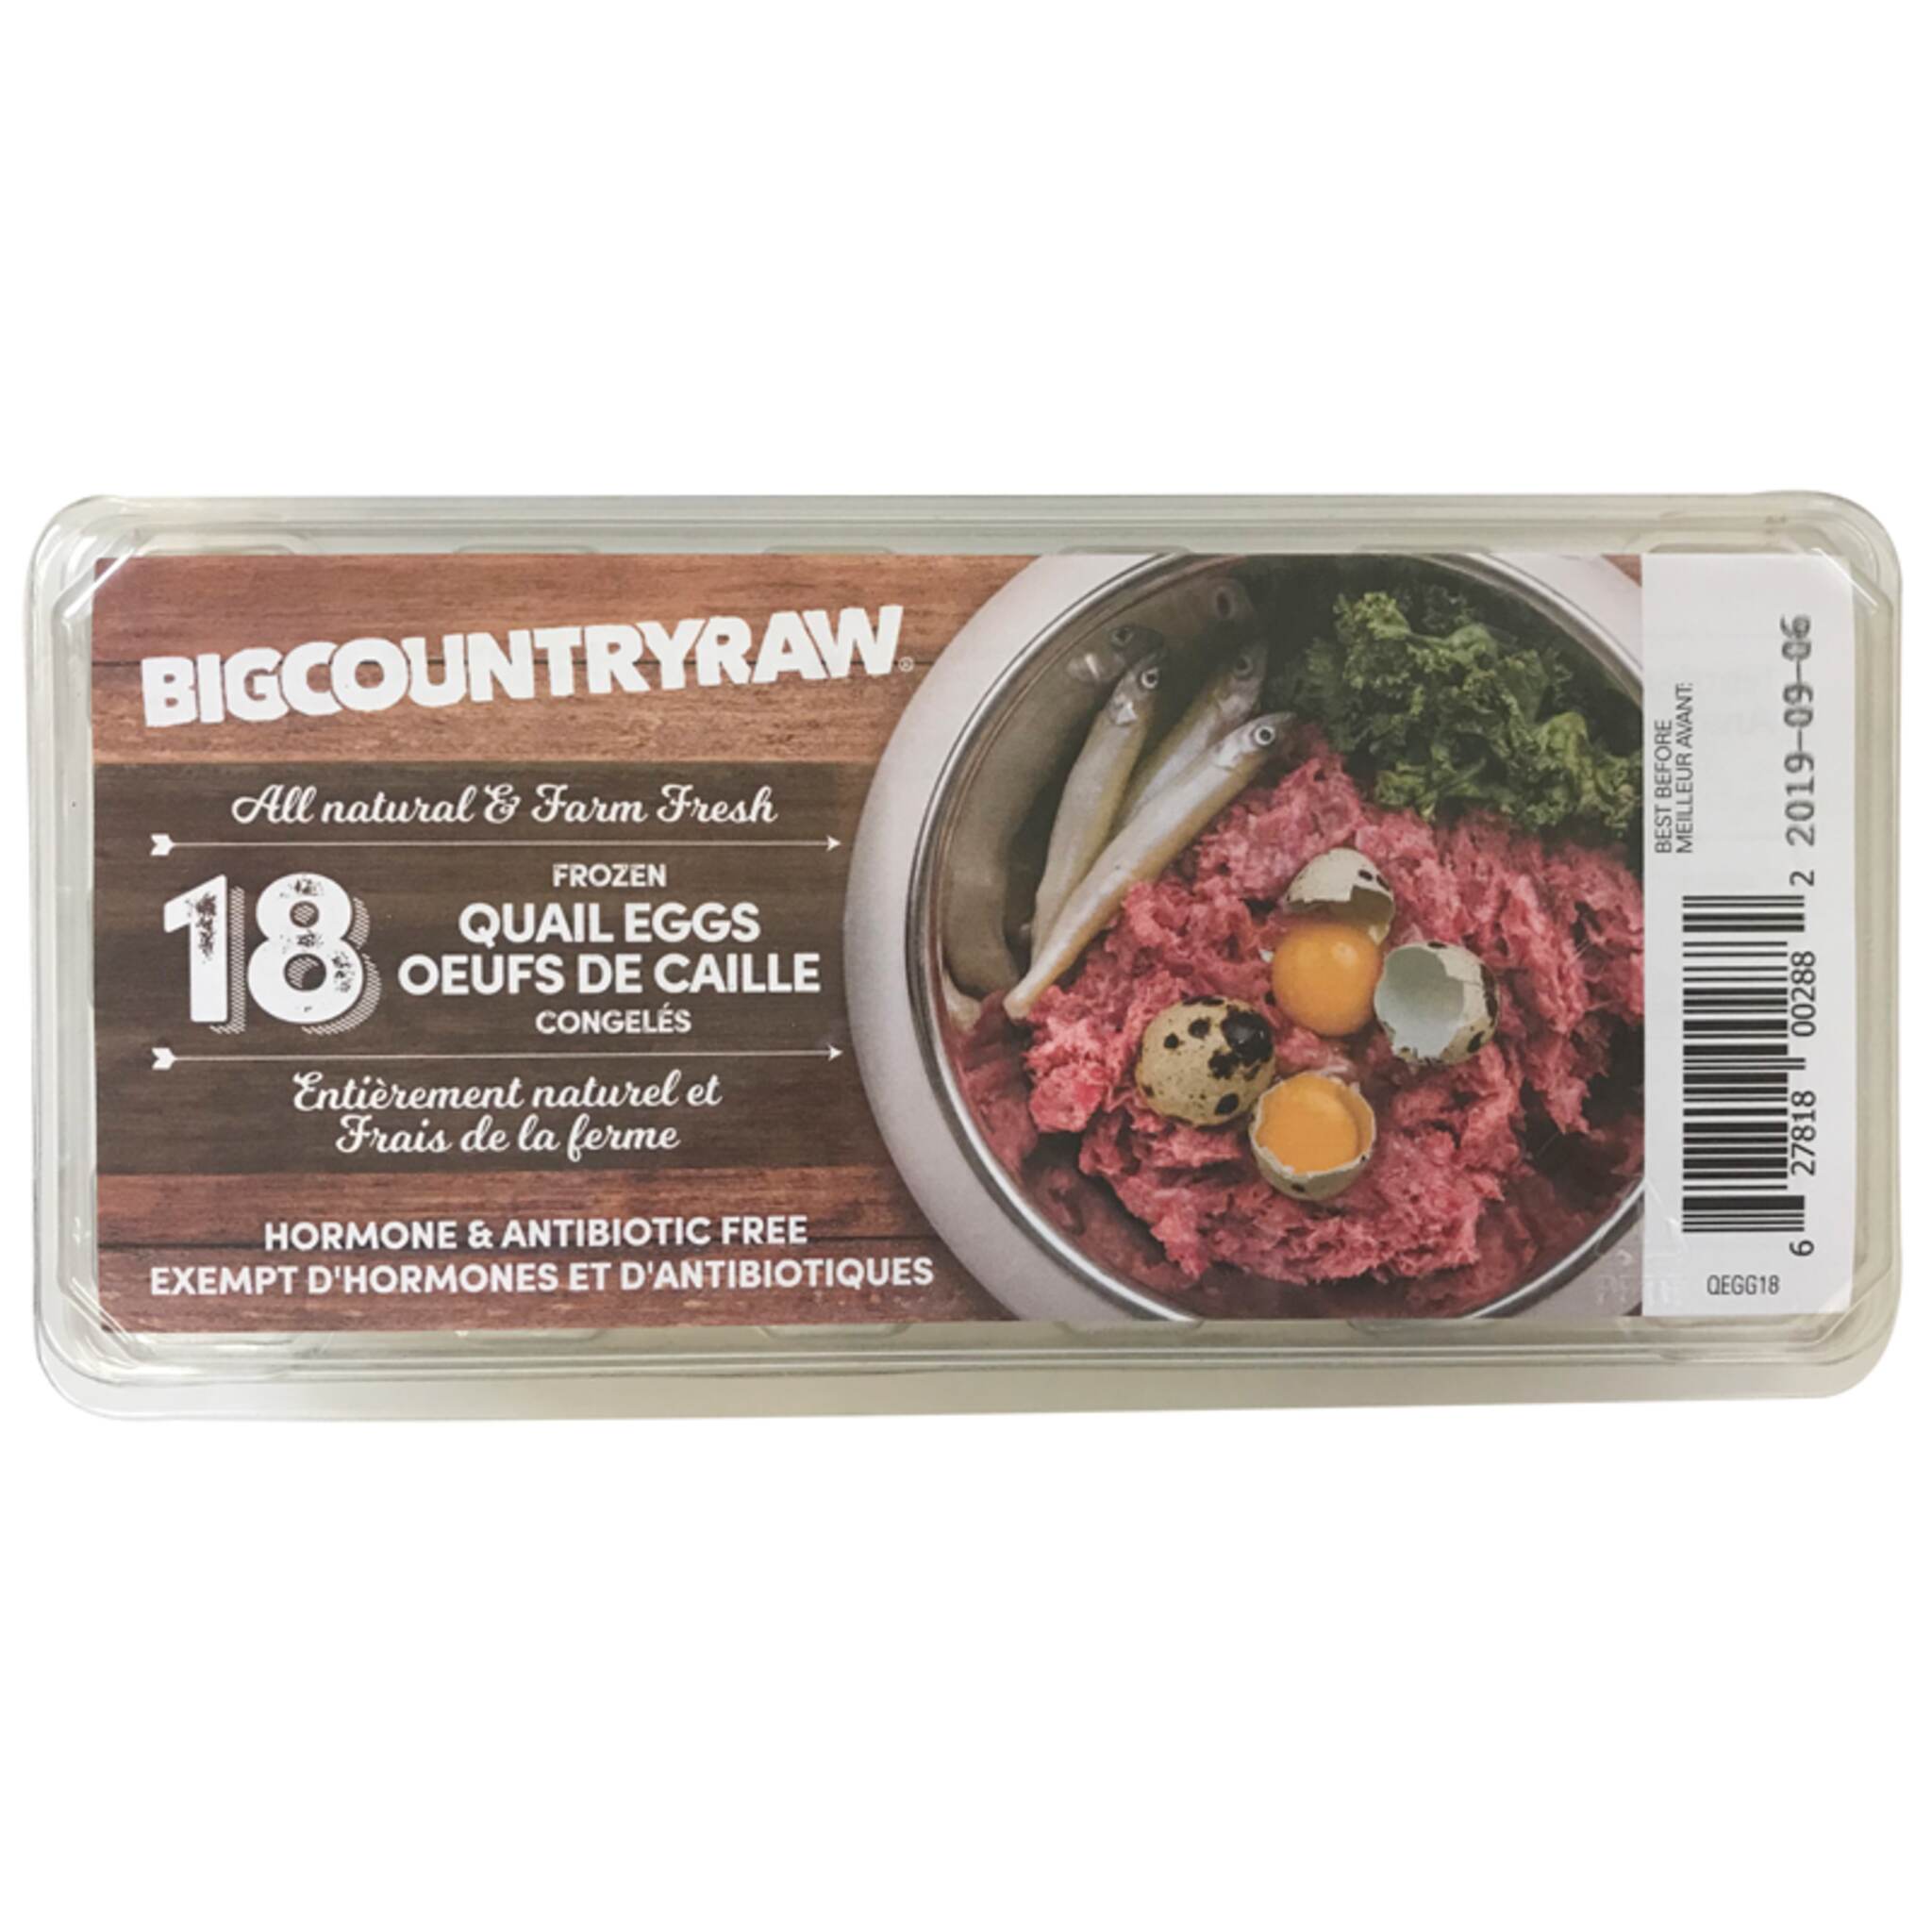 A carton of Big Country Raw Frozen Quail Eggs, 18 count, requires freezing.